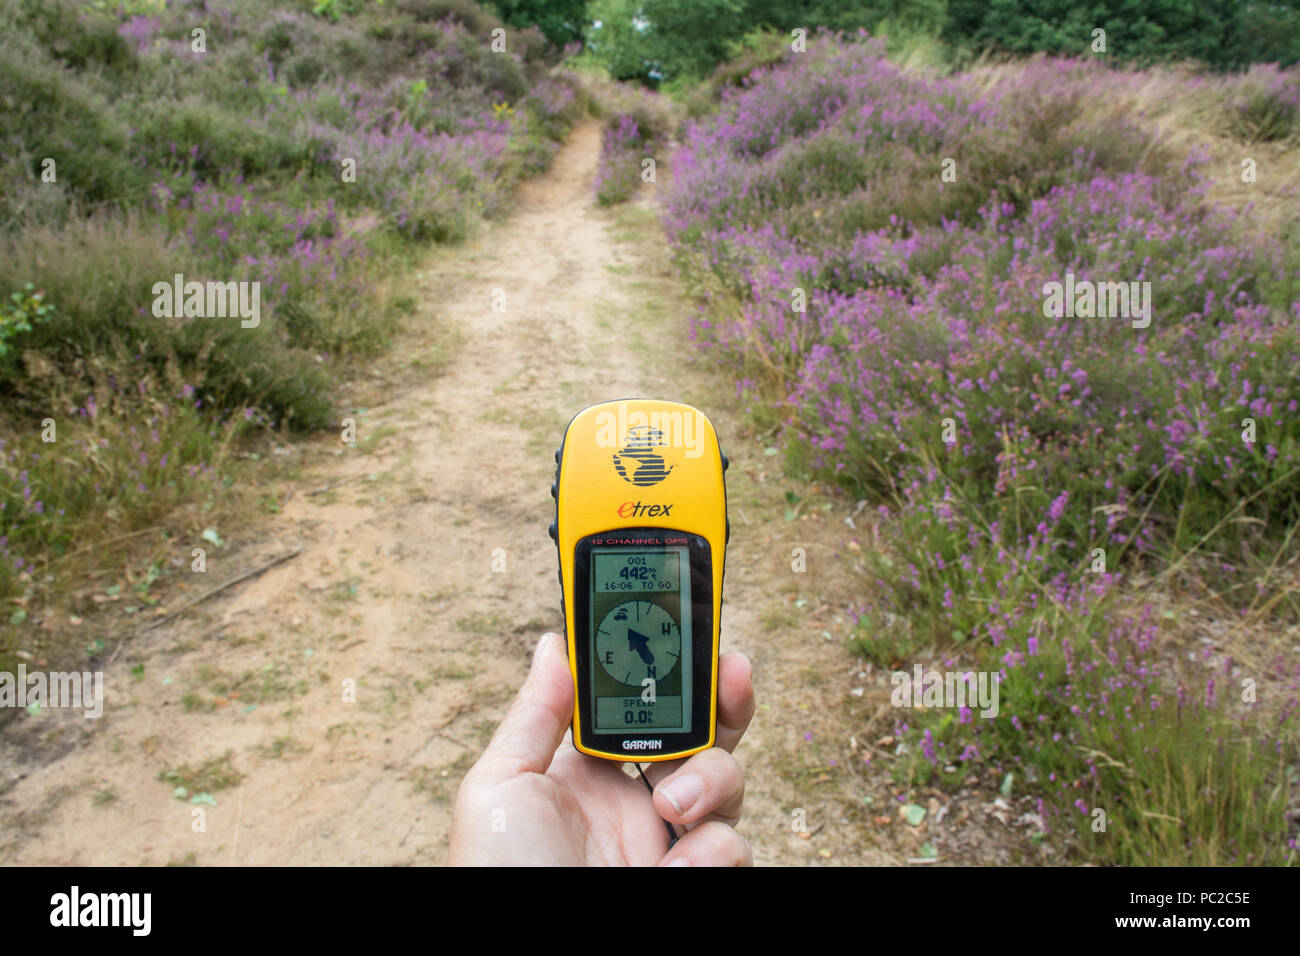 Woman using a handheld Garmin GPS unit to find the way along countryside (heathland) footpaths Stock Photo